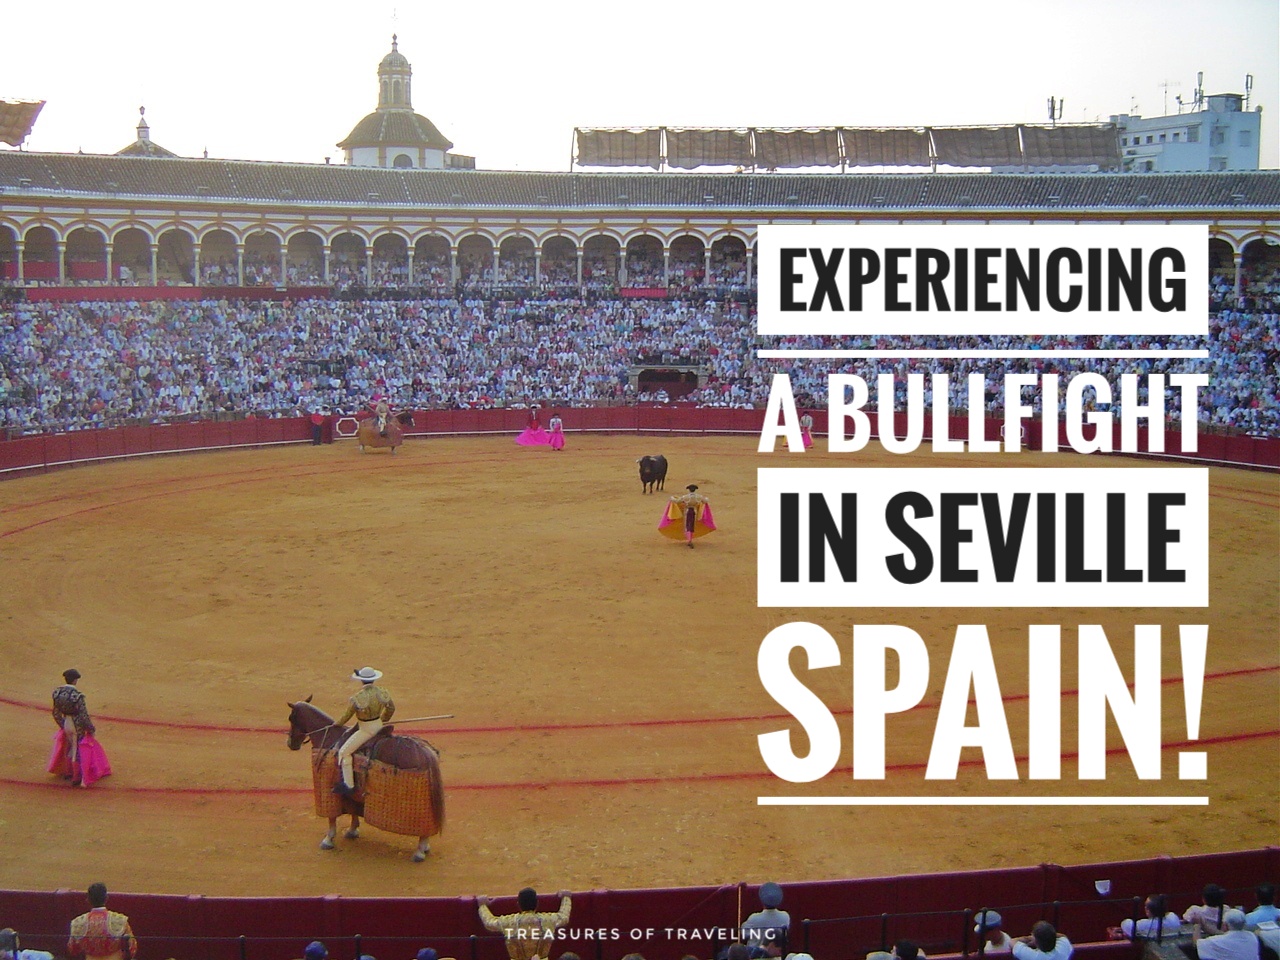 Experiencing a Bullfight in Seville Spain!